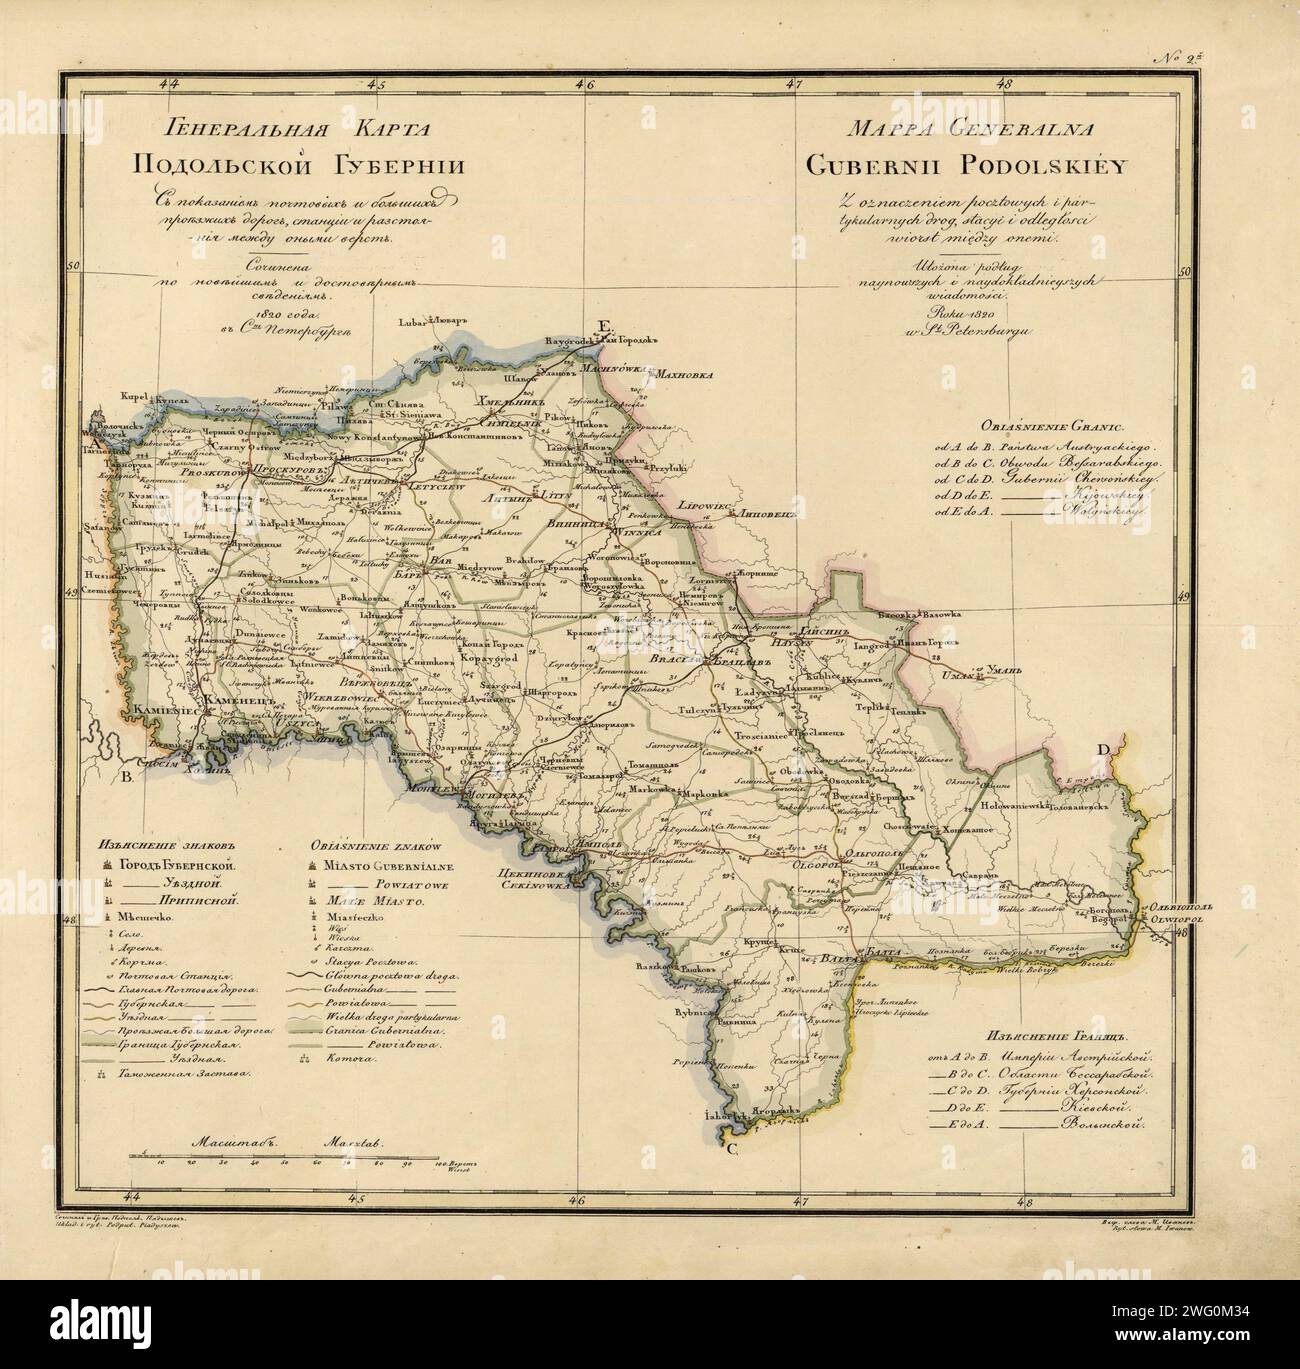 General Map of Podolsk Province: Showing Postal and Major Roads, Stations and the Distance in Versts between Them, 1820. This 1820 map of Podolsk Provinceis from a larger work,Geograficheskii atlas Rossiiskoi imperii, tsarstva Pol'skogo i velikogo kniazhestva Finliandskogo(Geographical atlas of the Russian Empire, the Kingdom of Poland, and the Grand Duchy of Finland), containing 60 maps of the Russian Empire. Compiled and engraved by Colonel V.P. Piadyshev, it reflects the detailed mapping carried out by Russian military cartographers in the first quarter of the 19th century. The map shows po Stock Photo